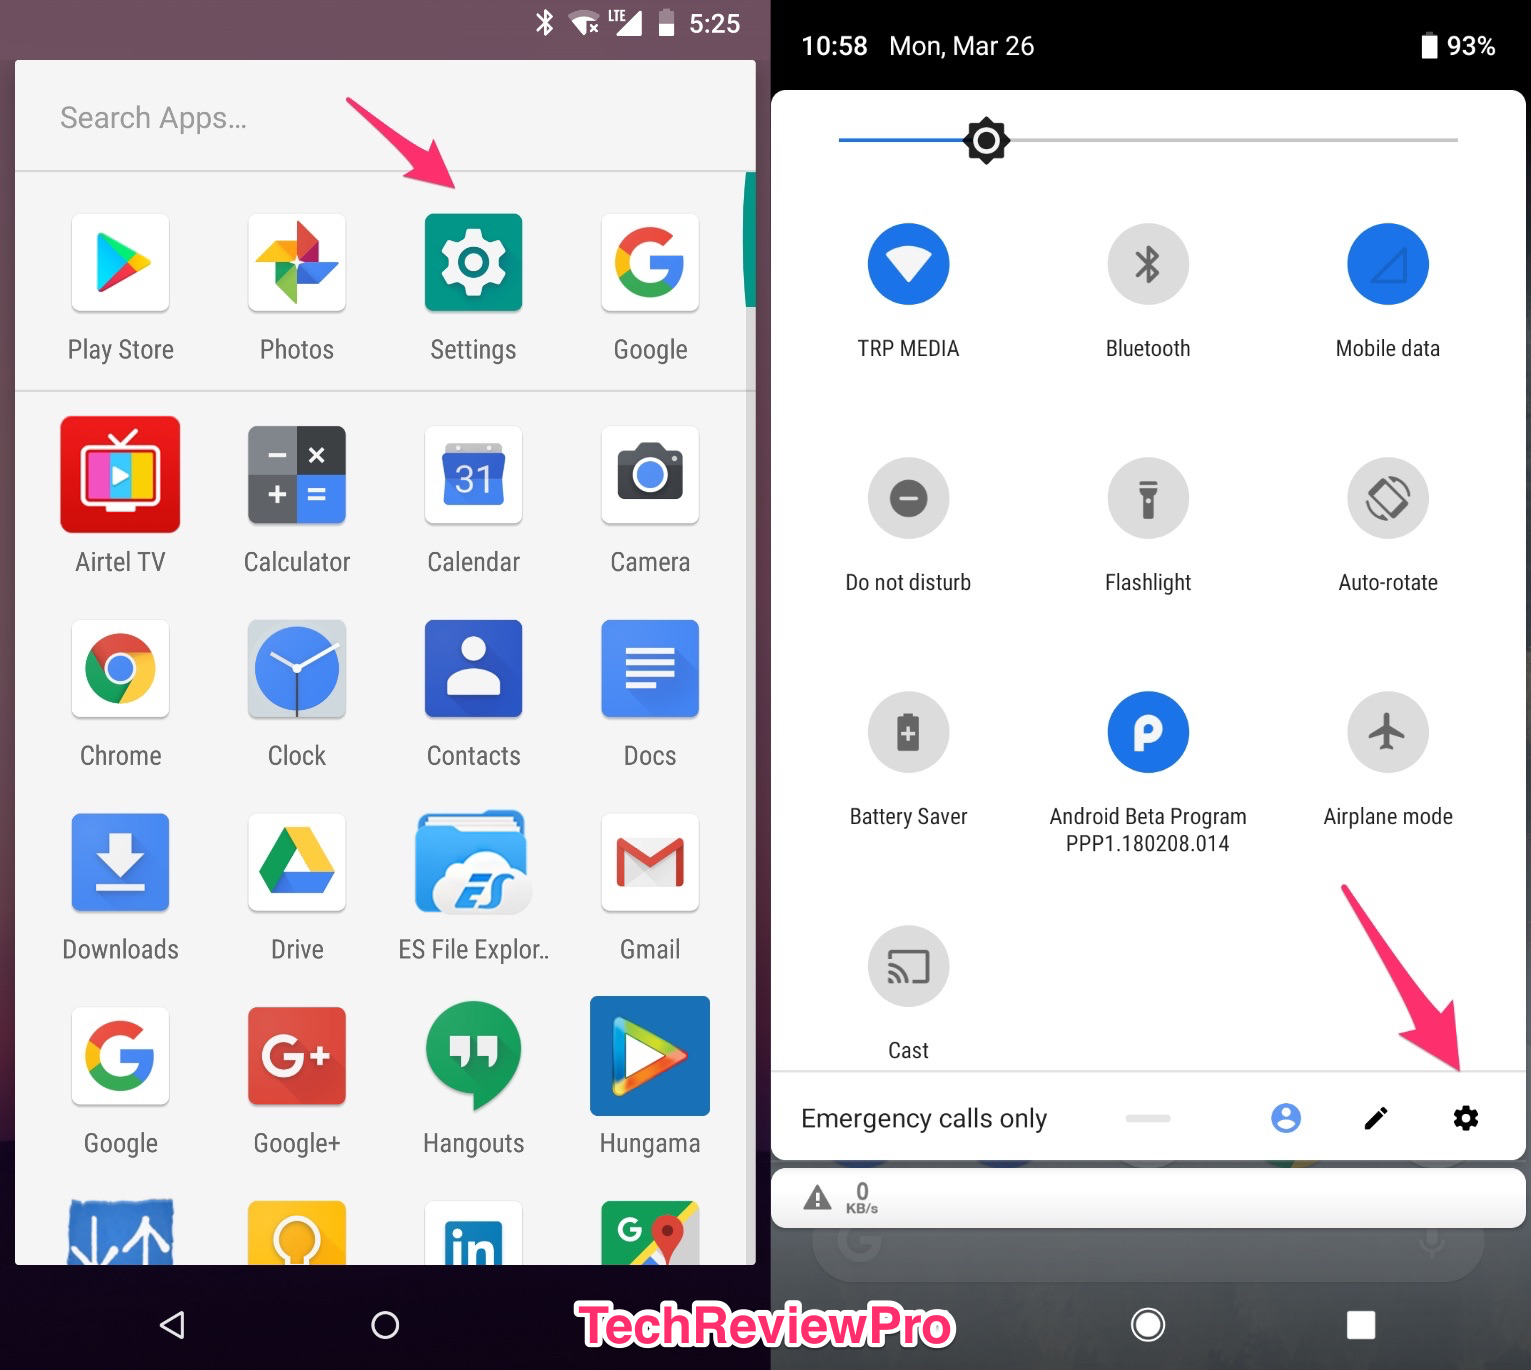 How to Open Settings App on Android - Play any Android Game without Downloading